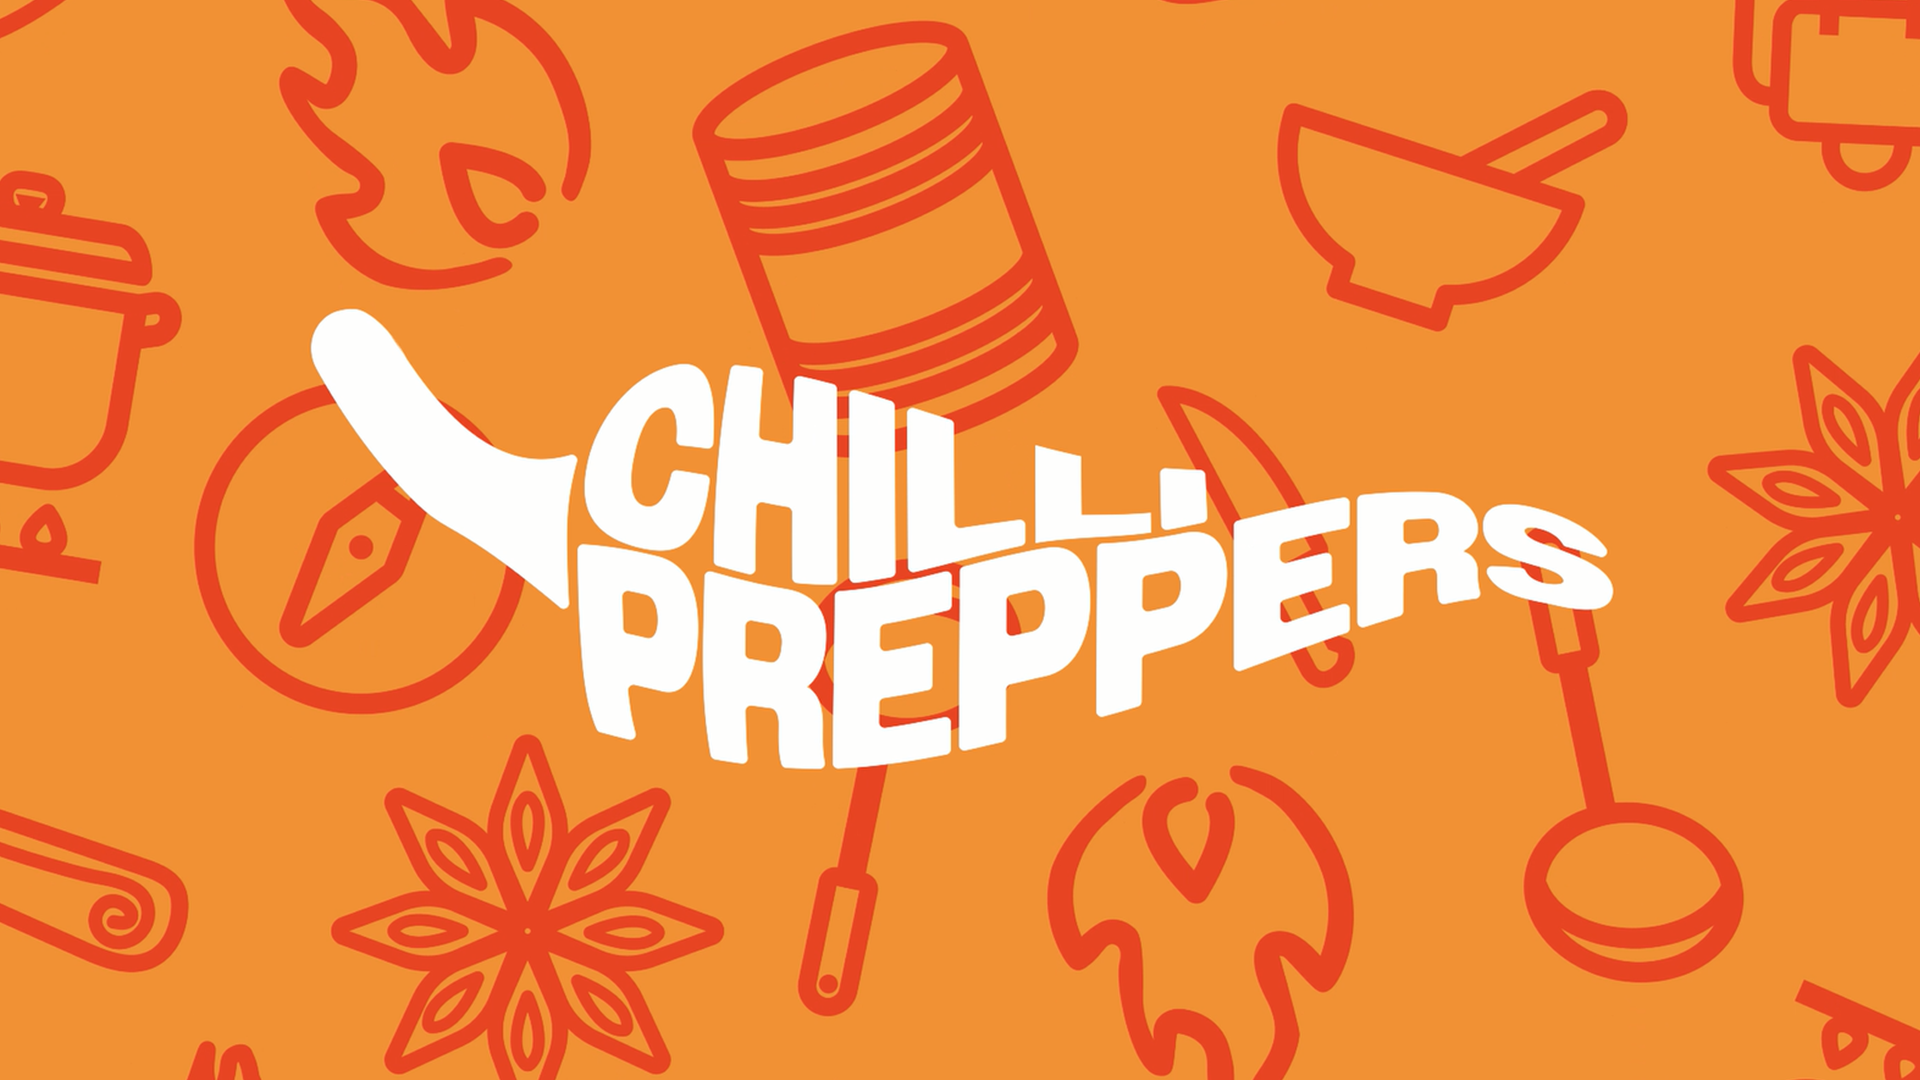 Video describing Chilli Preppers and showing images of the shop and food to upbeat music.